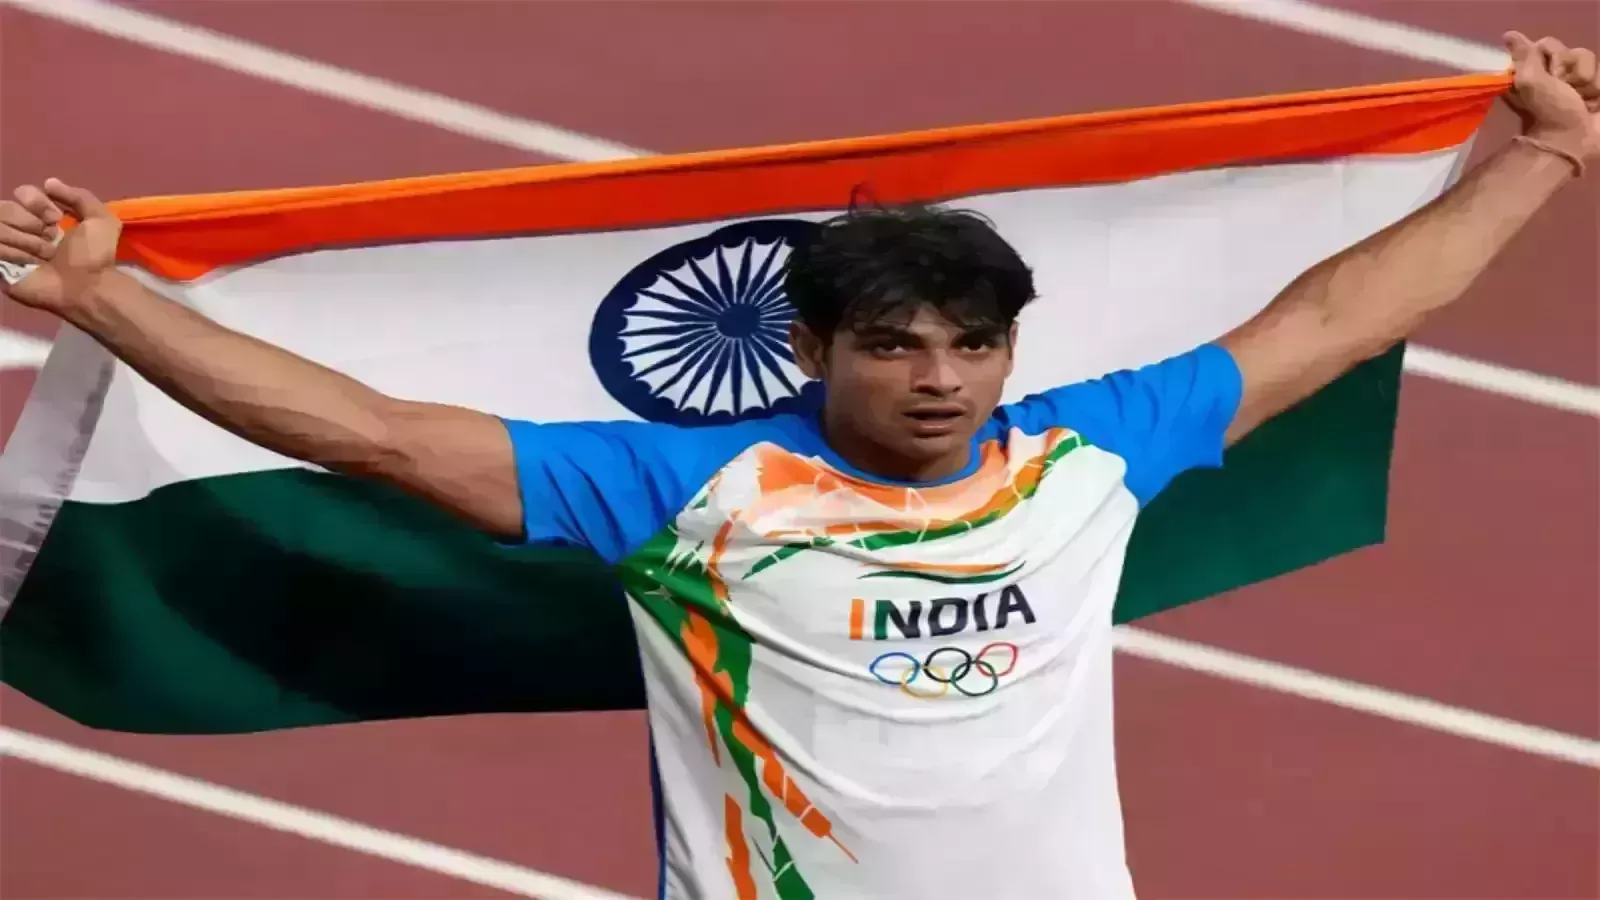 Neeraj Chopra wins javelin gold, scripts history by clinching Indias first Olympic gold in athletics